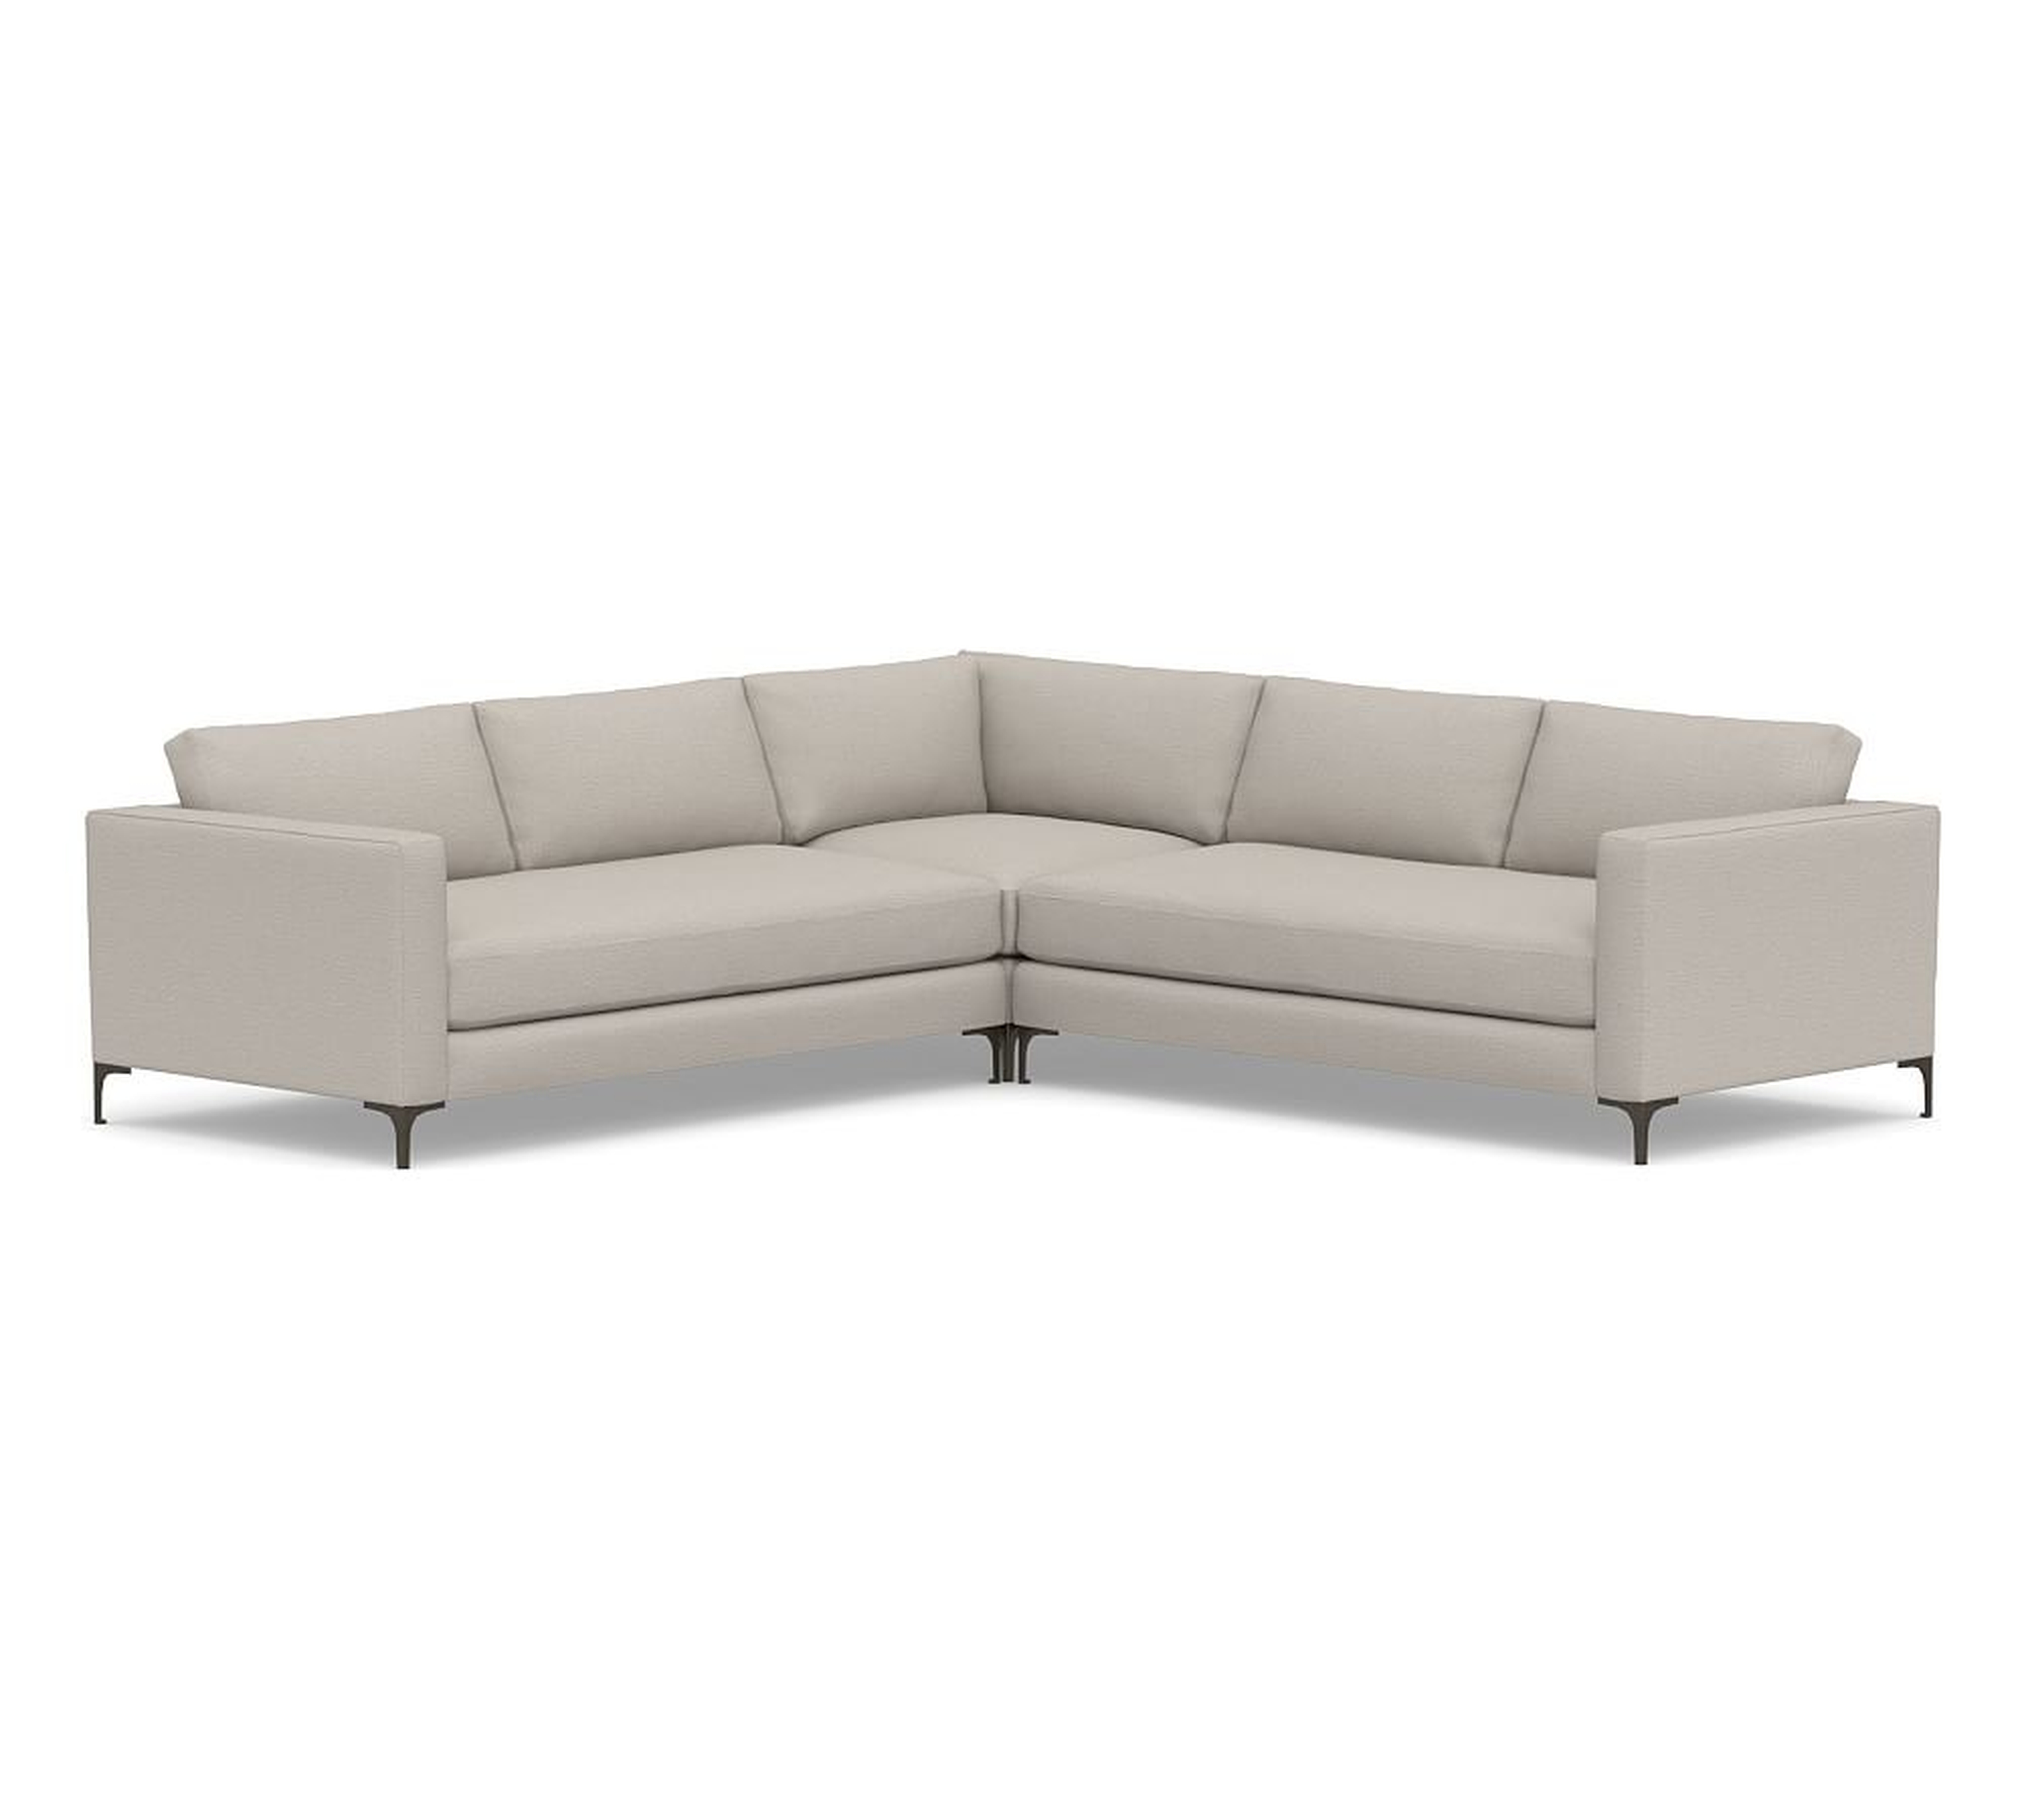 Jake Upholstered 3-Piece L-Shaped Corner Sectional, Bench Cushion, Bronze Legs, Polyester Wrapped Cushions, Chunky Basketweave Stone - Pottery Barn